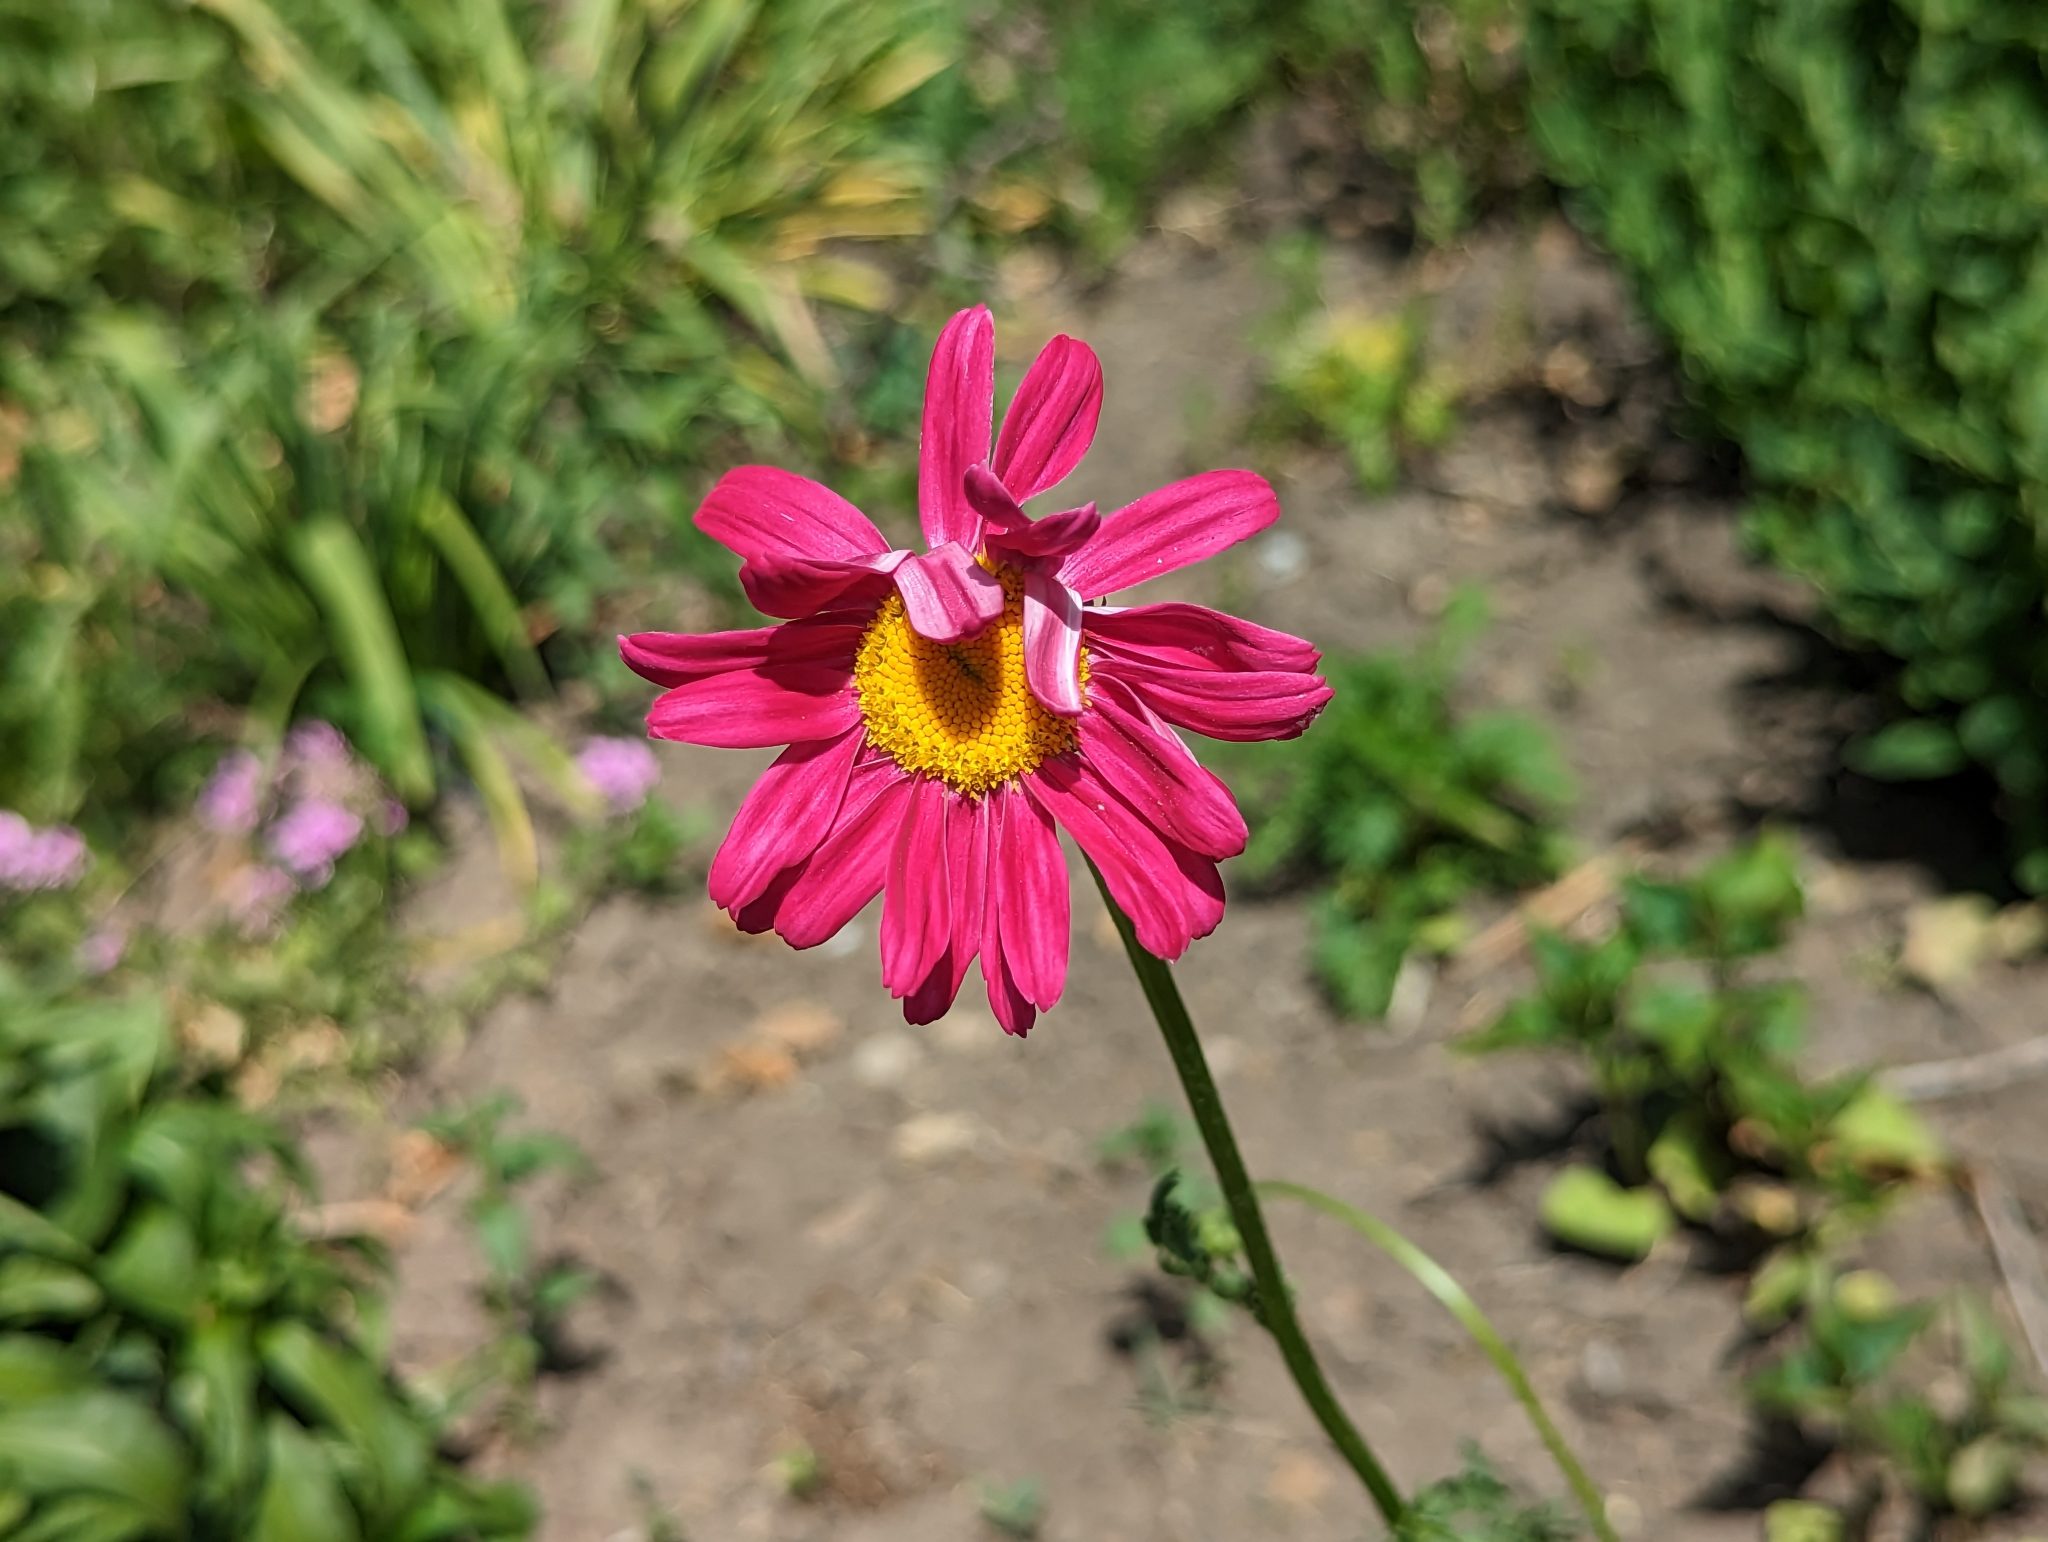 Small pink flower with yellow in center